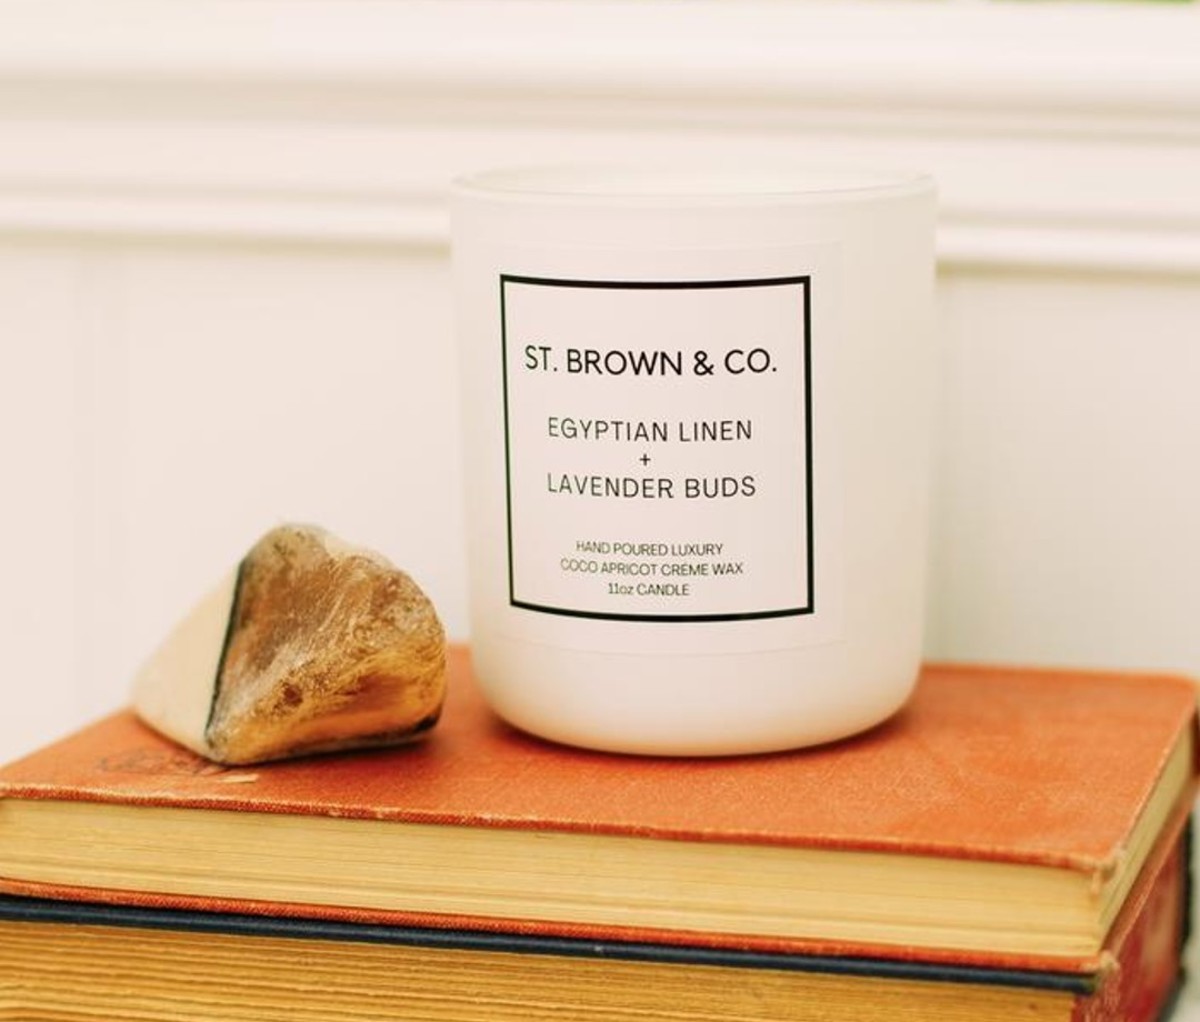 St. Brown & Co. Luxury Gift Box